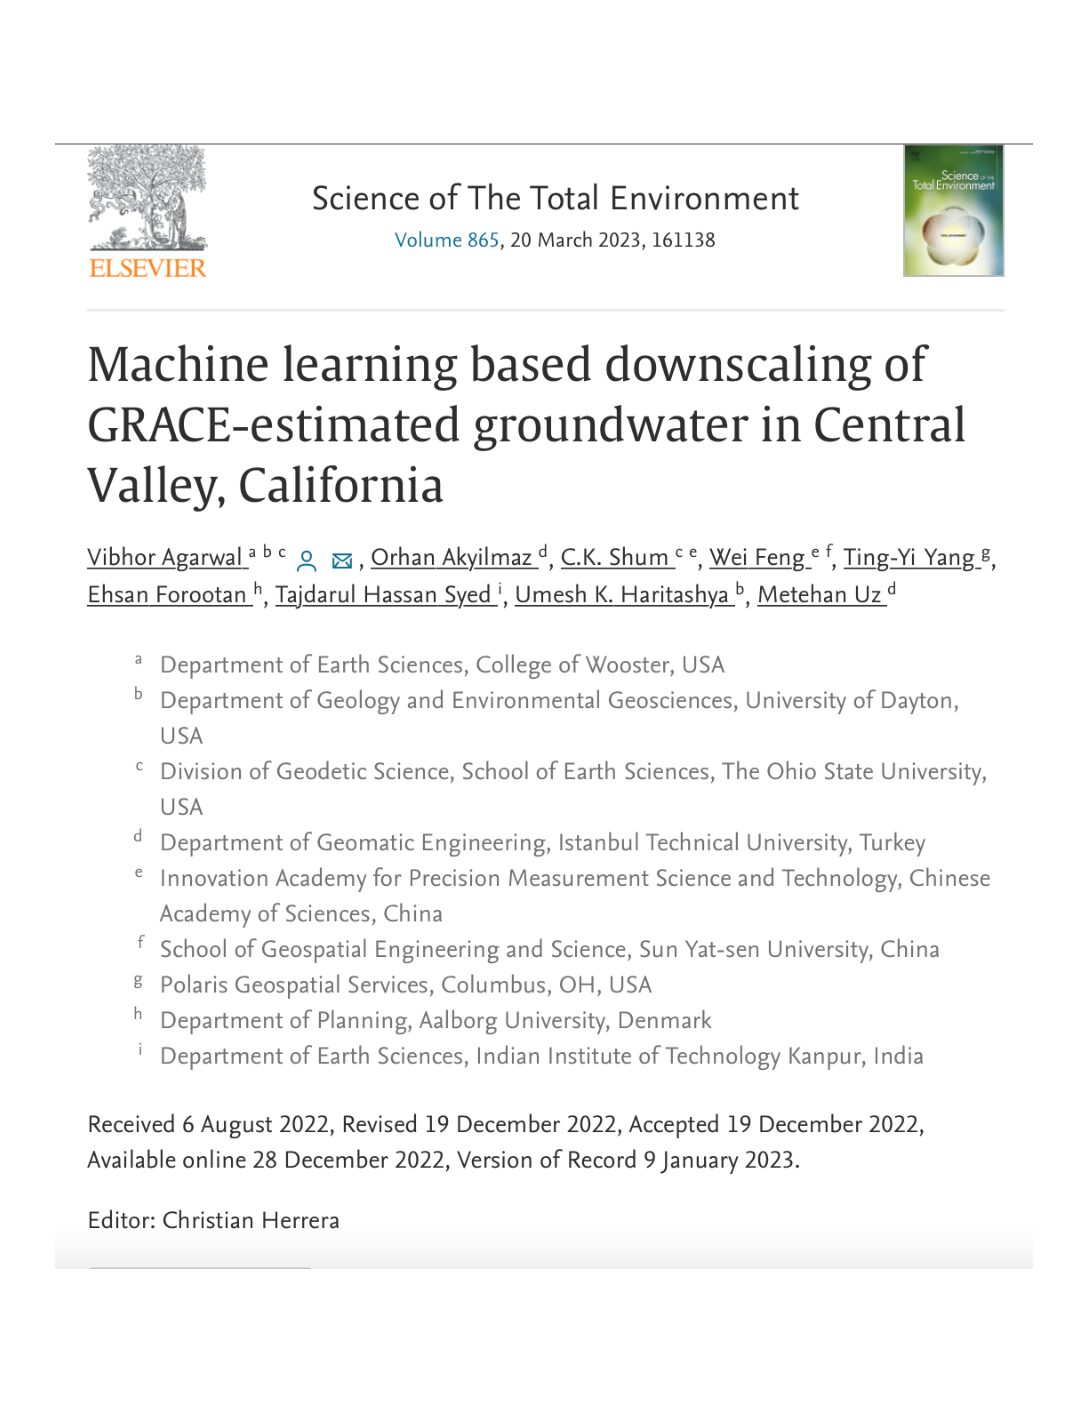 Machine learning based downscaling of GRACE-estimated groundwater in Central Valley, California